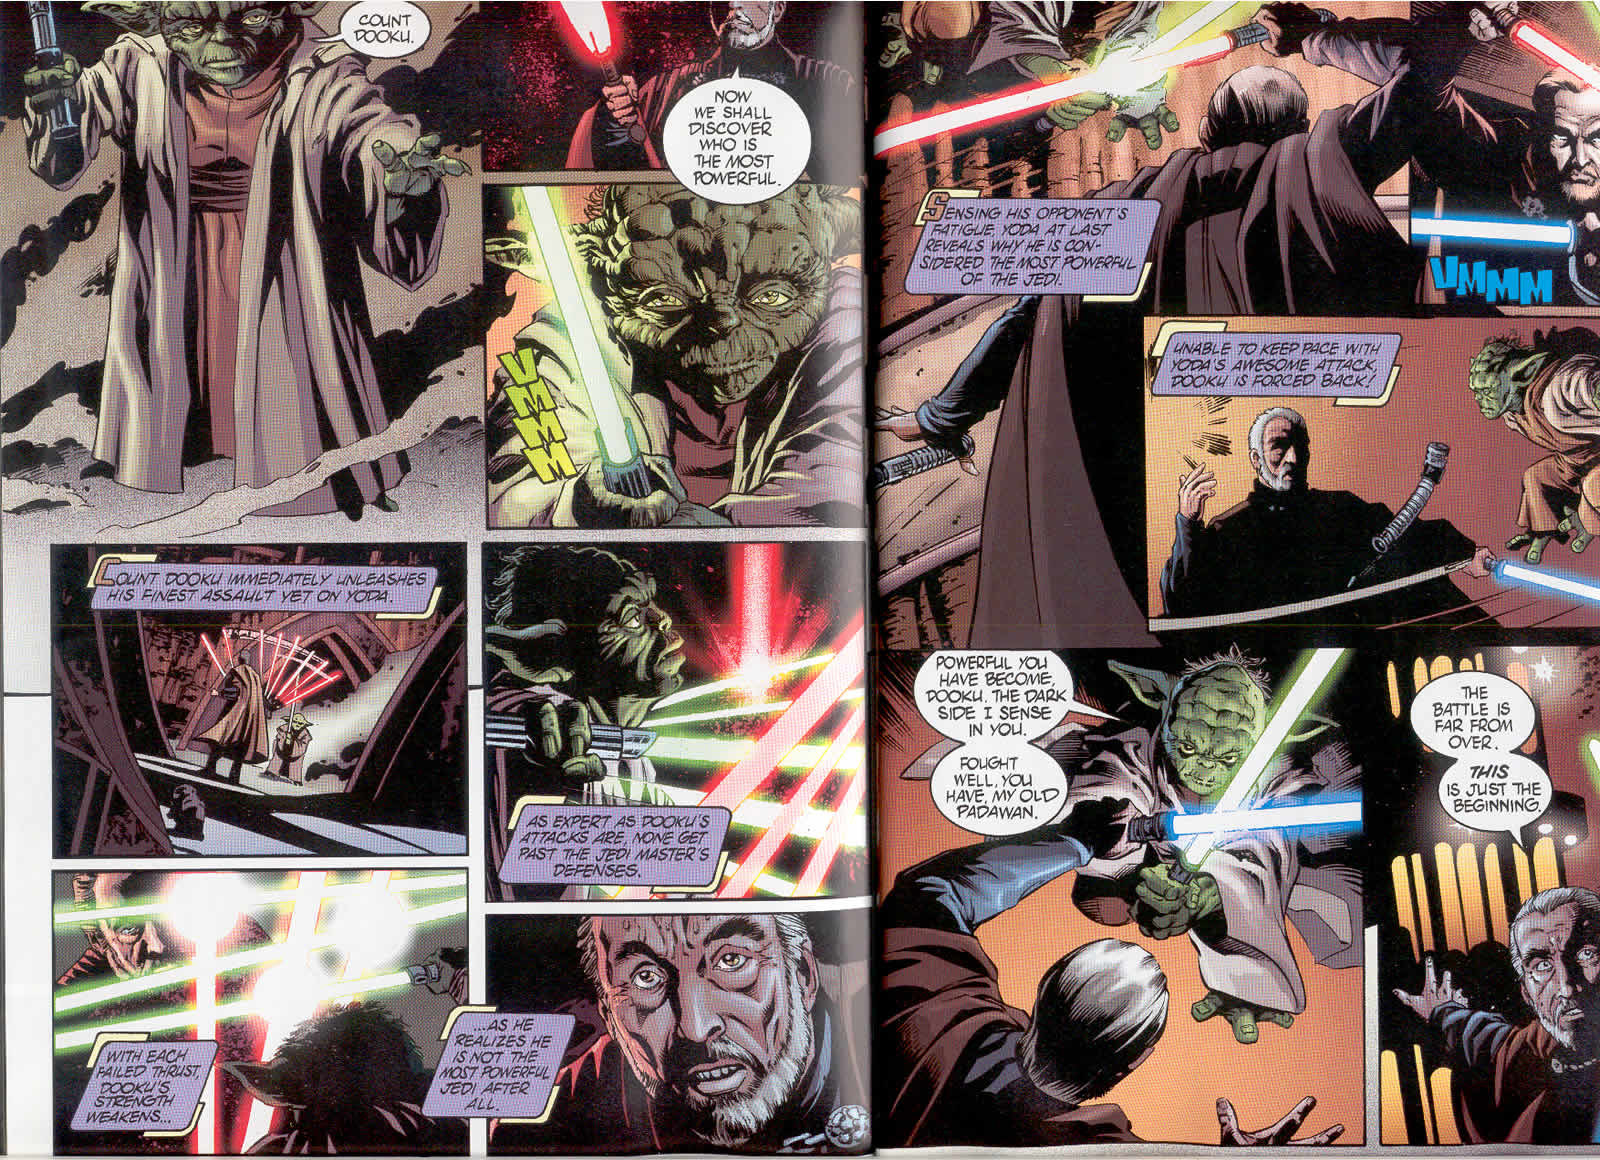 Yoda vs. Dooku scan from Attack of the Clones comic book